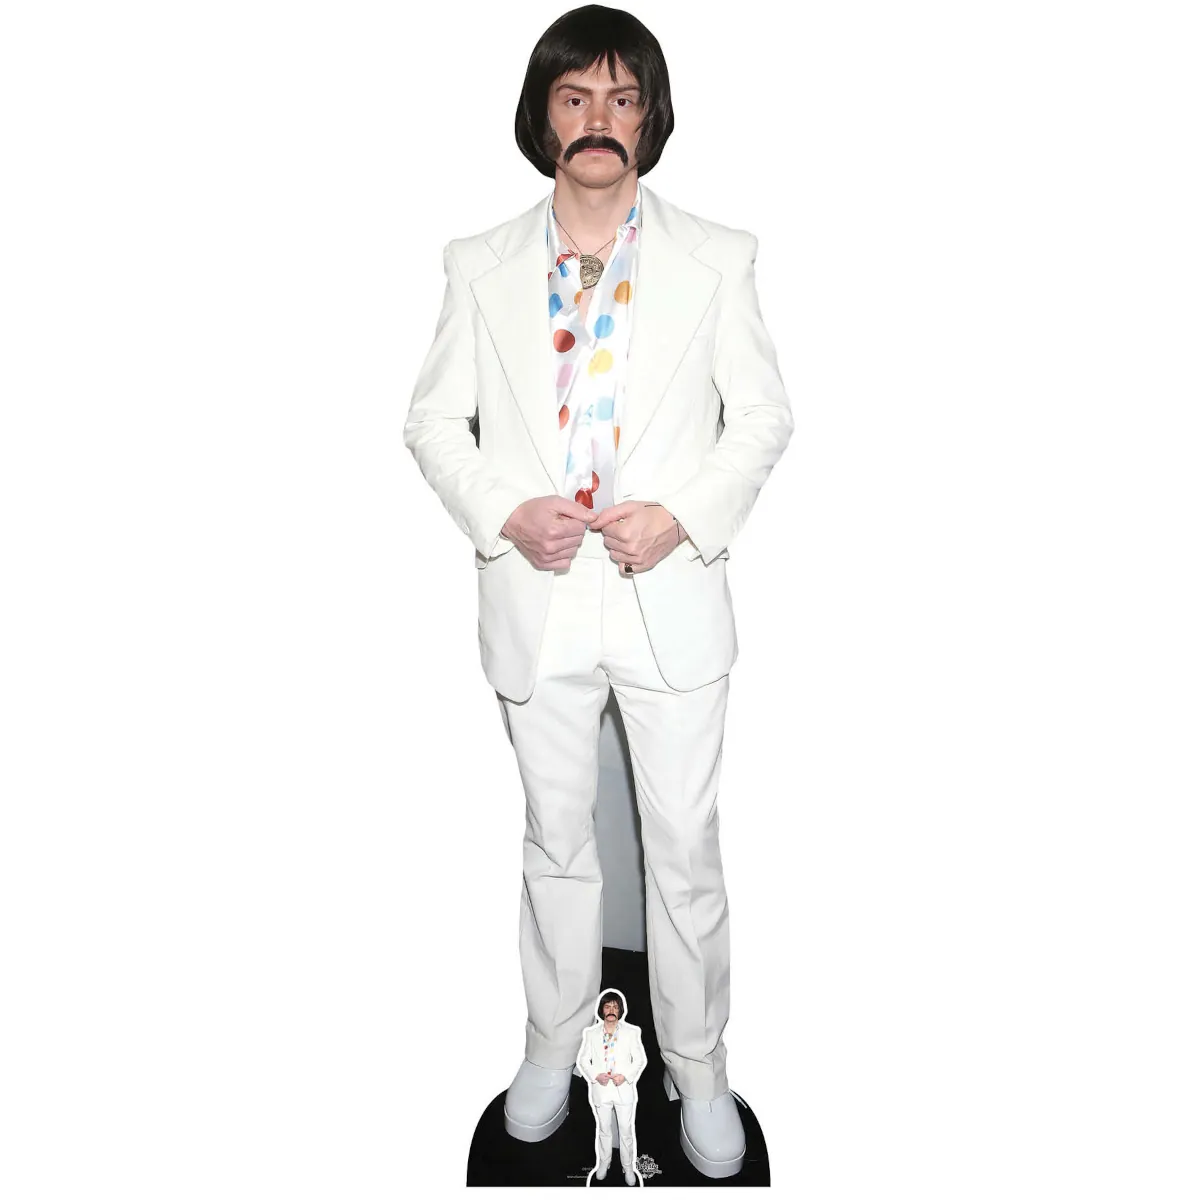 CS1076 Evan Peters 'White Suit' (American Actor) Lifesize + Mini Cardboard Cutout Standee Front